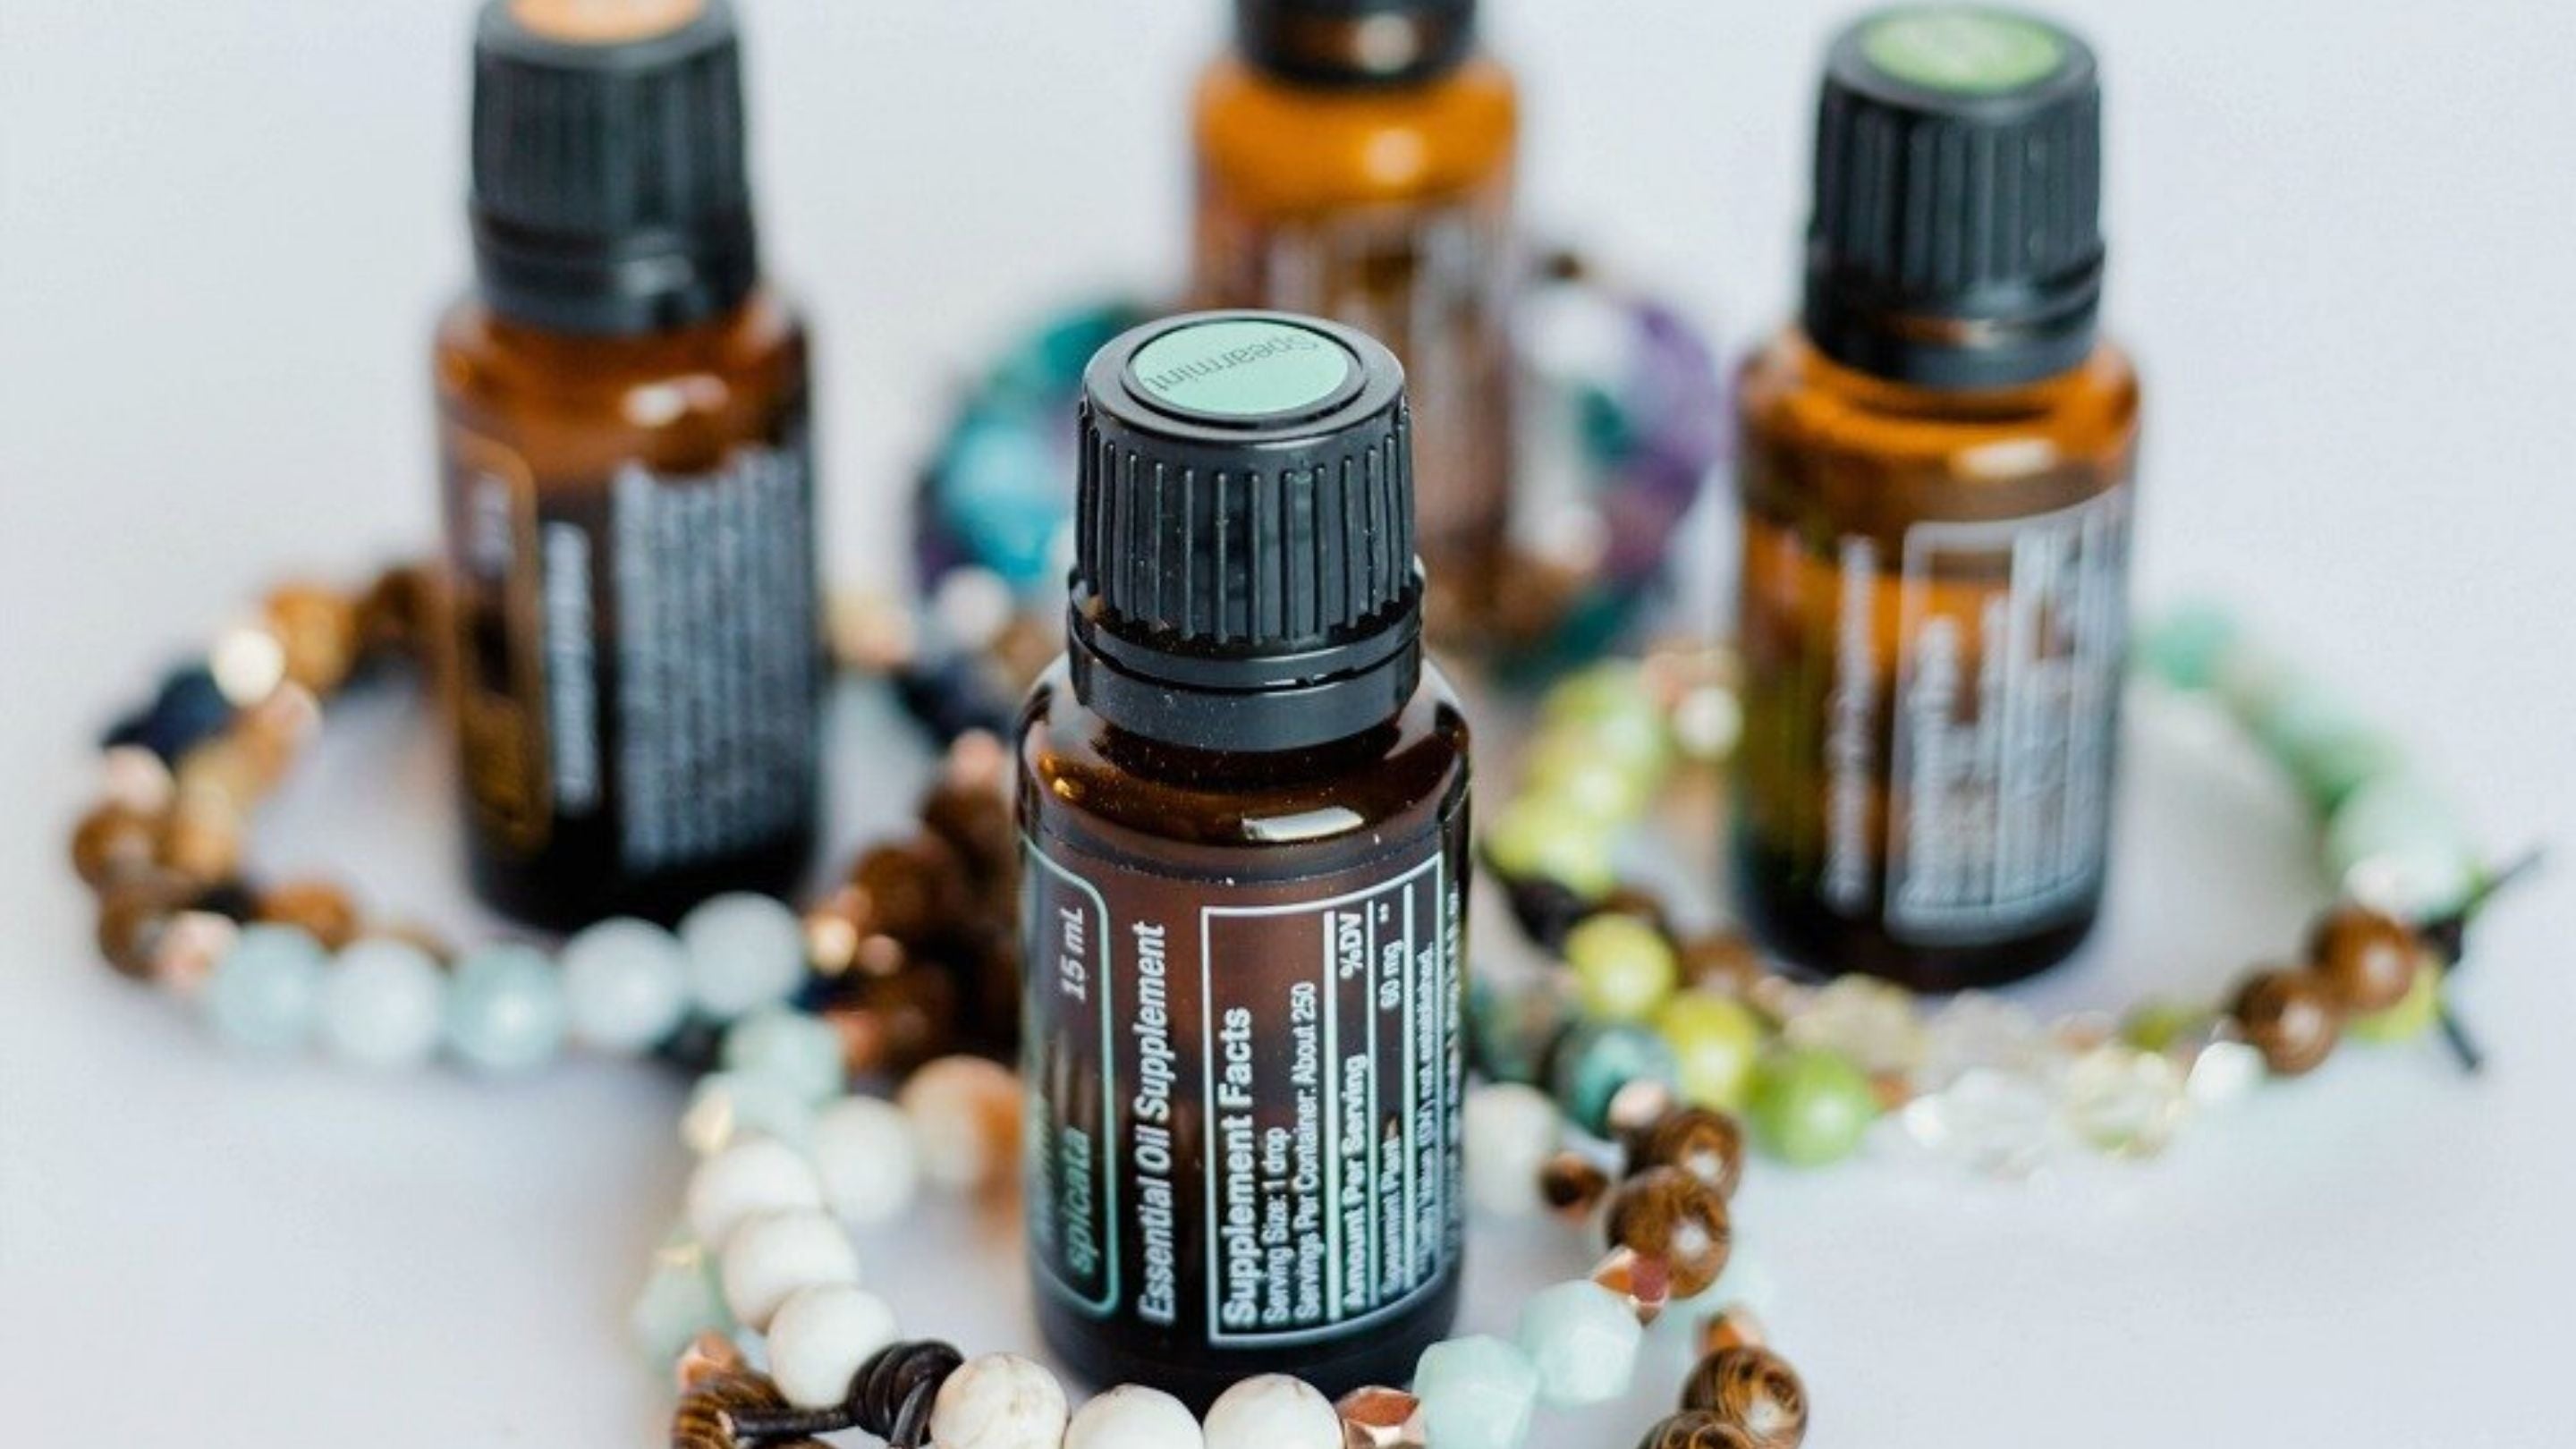 20 doTERRA Essential Oil Gifts for Under 25 Dollars